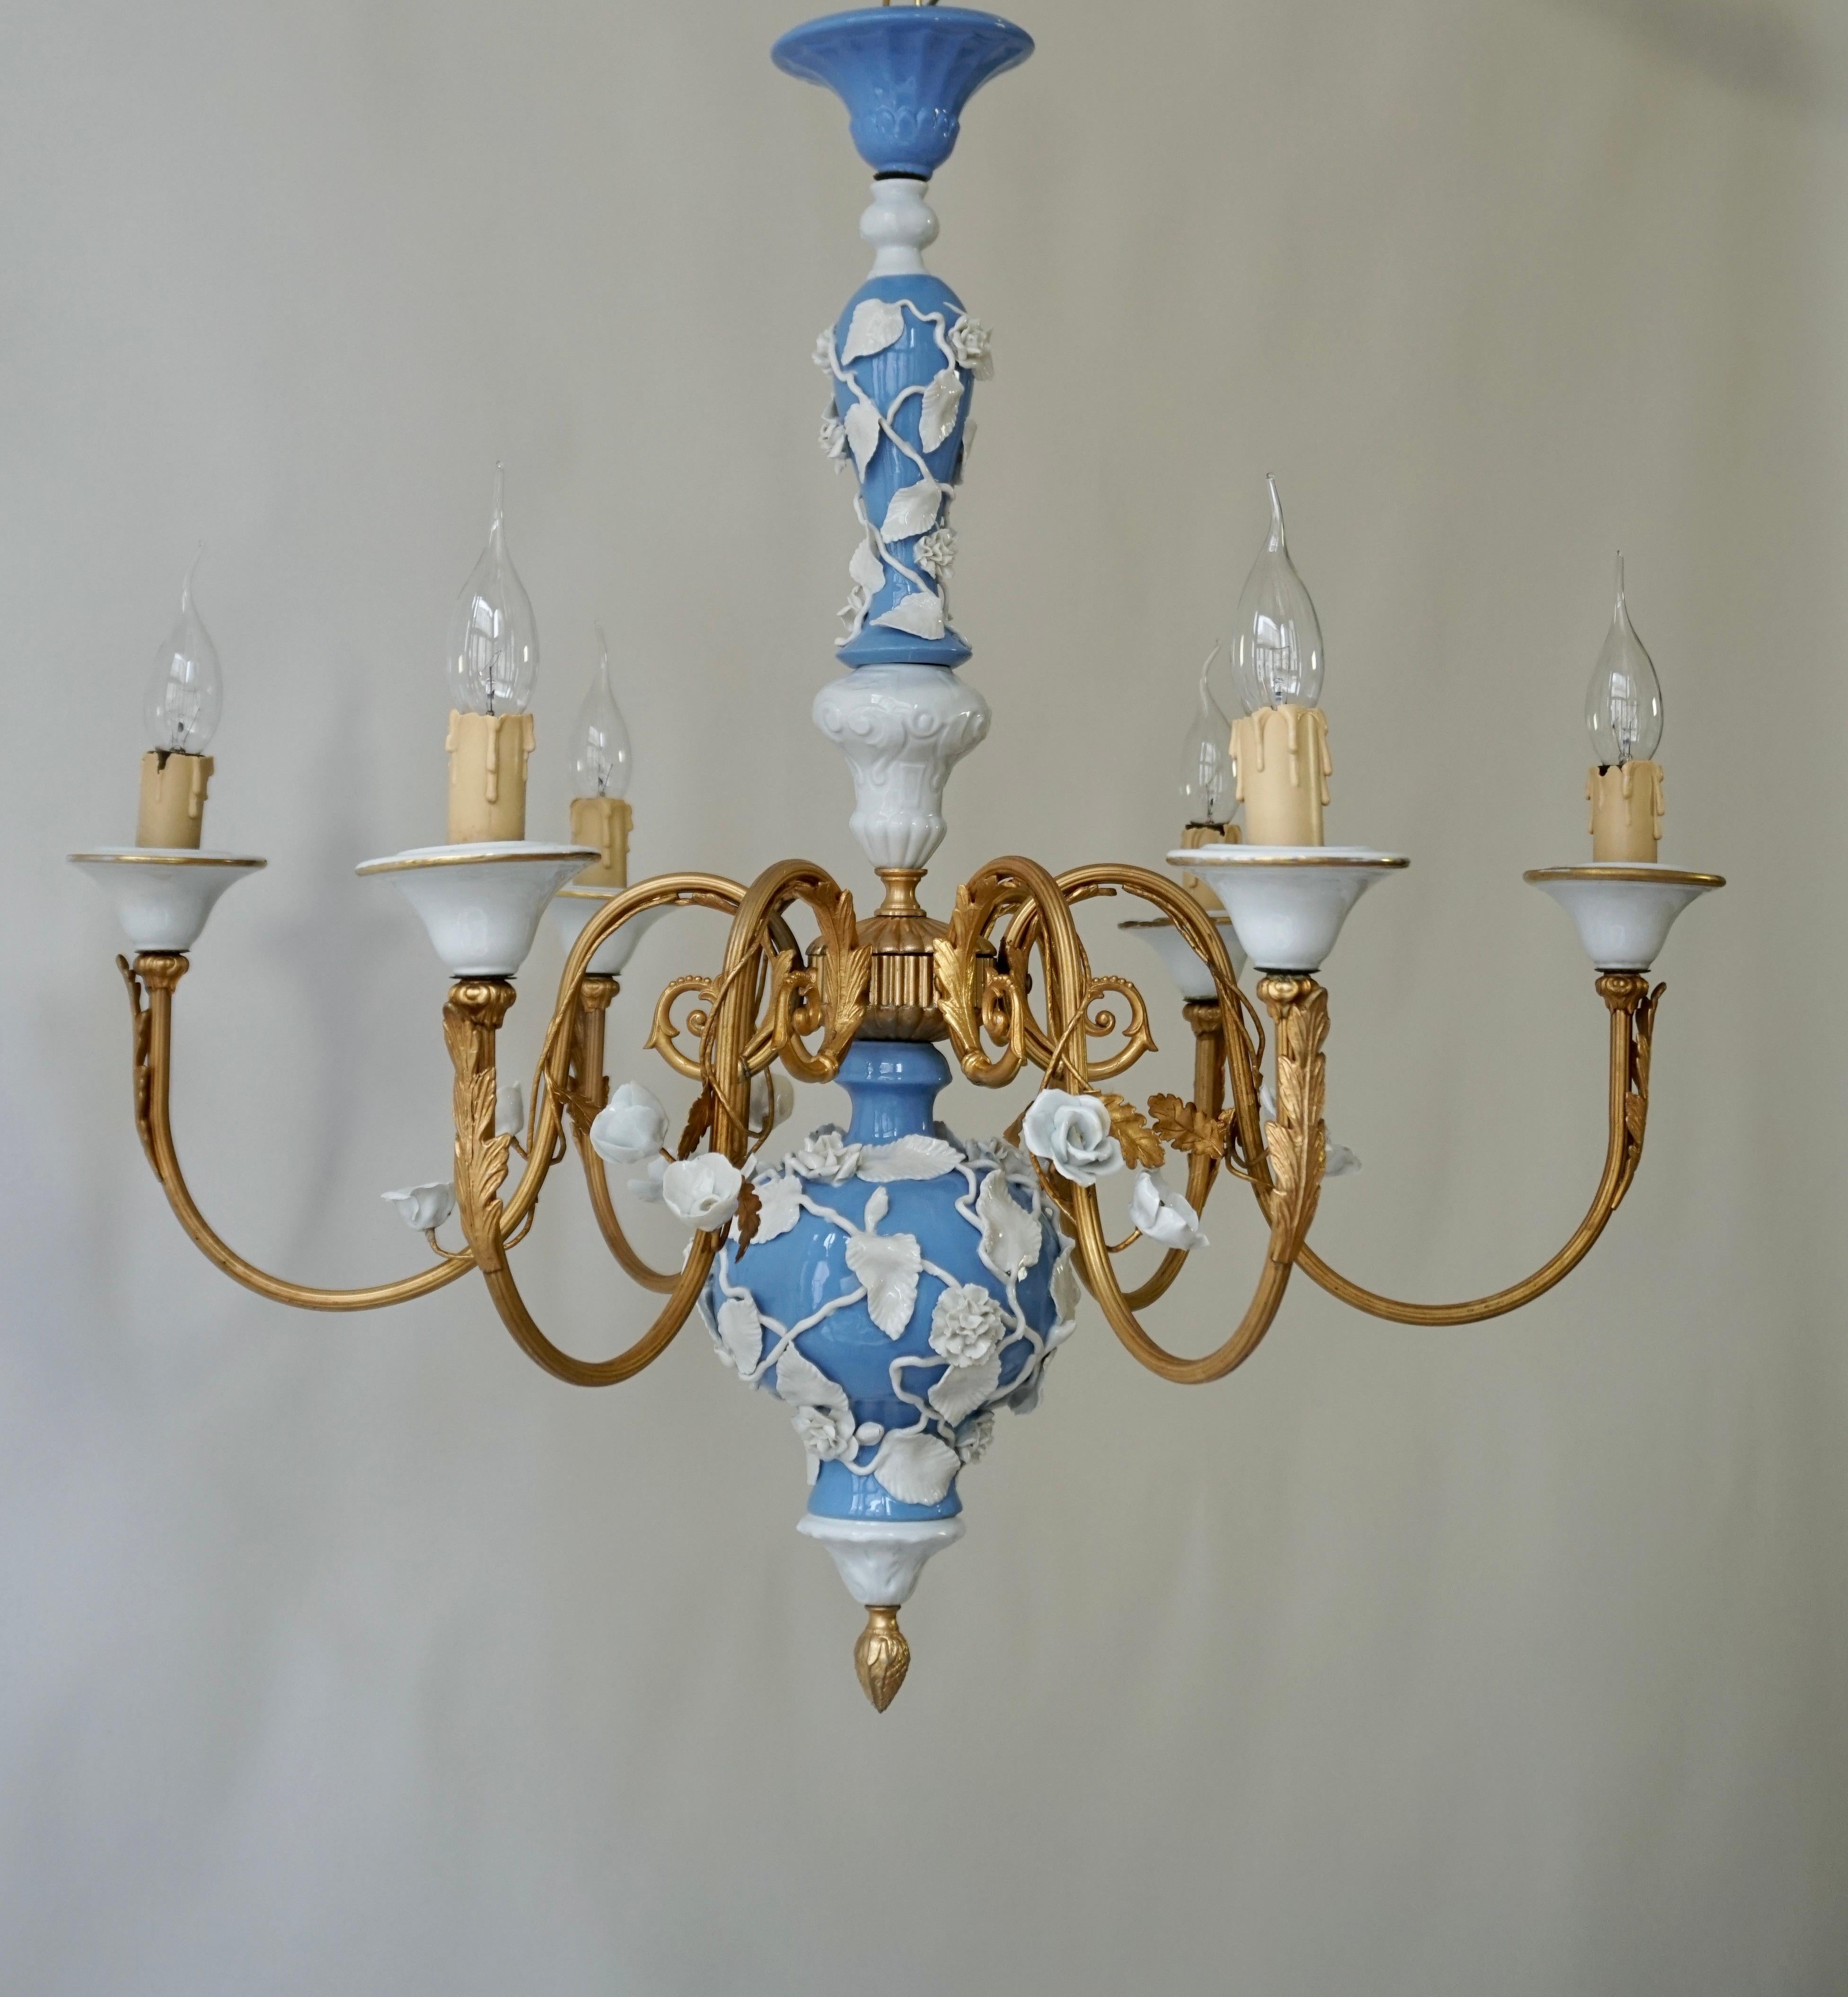 Elegant white and blue porcelain chandelier with gilt acanthus leaf details.
There are 6 arms each carrying a single lamp holder (e14) 

The lamp has six sockets for small incandescent lamps with screw base or E14 type LEDs. It is possible to